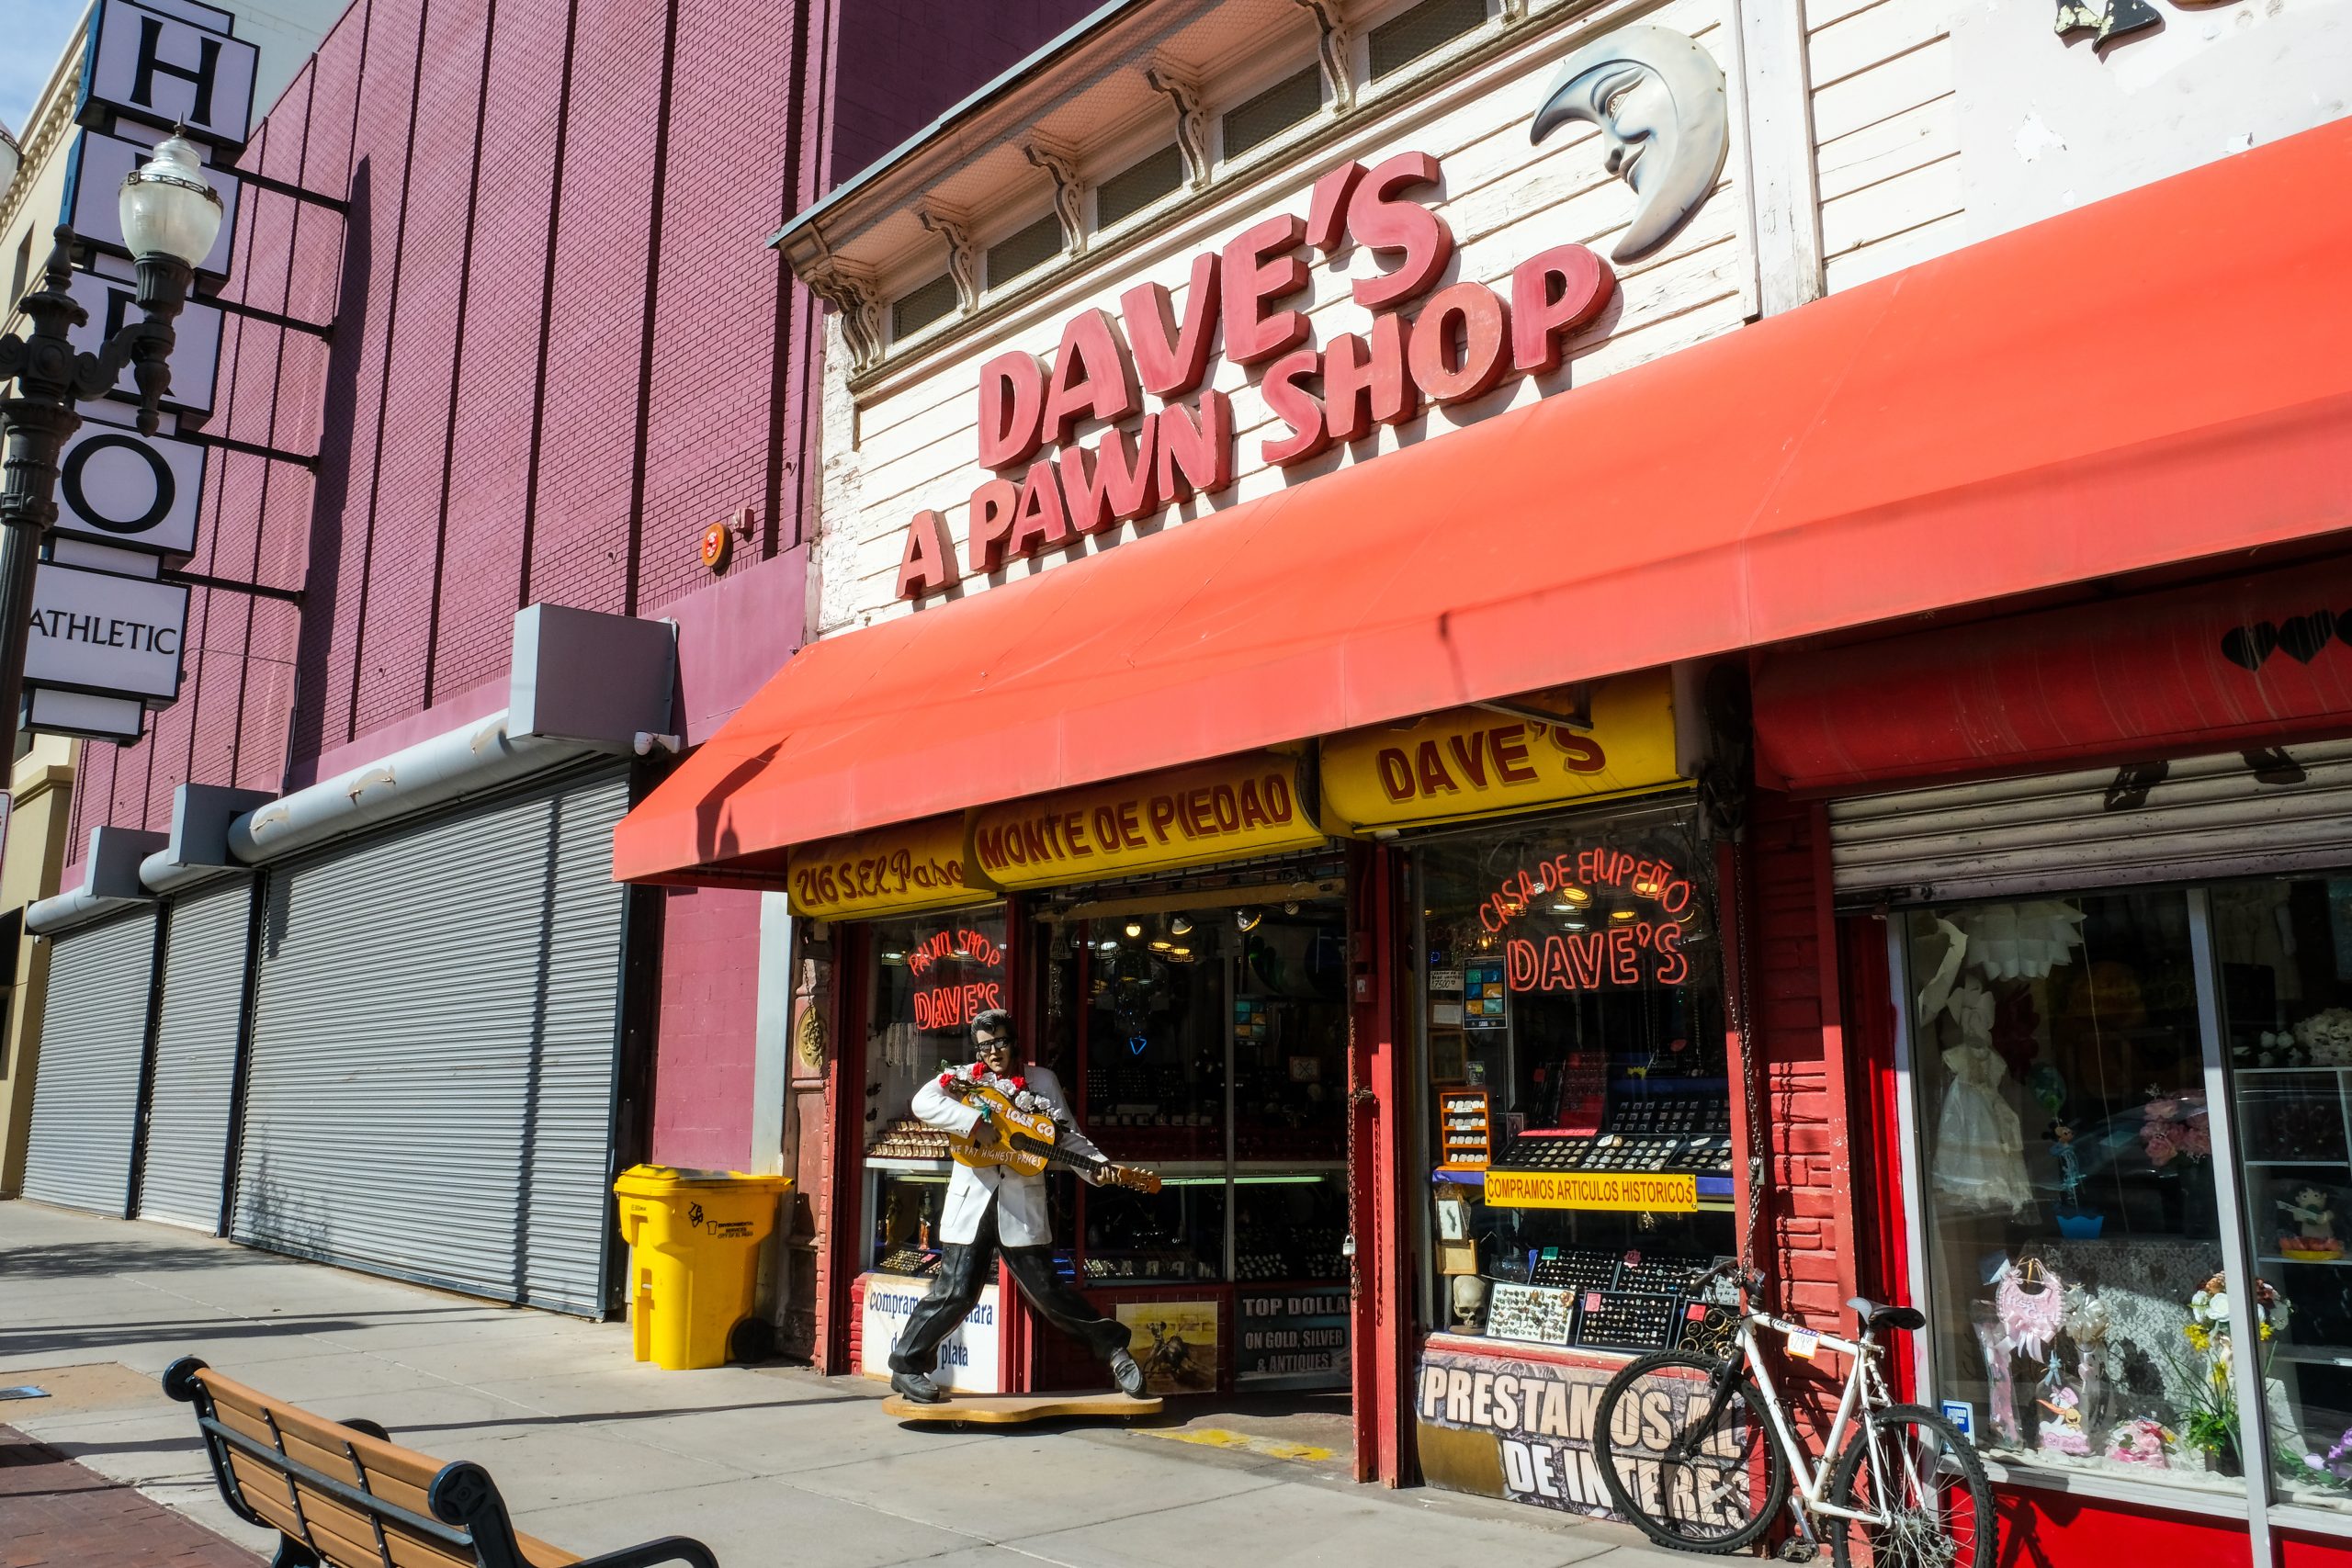 Daves A Pawn Shop Is Filled To The Brim With Historical Eclectic